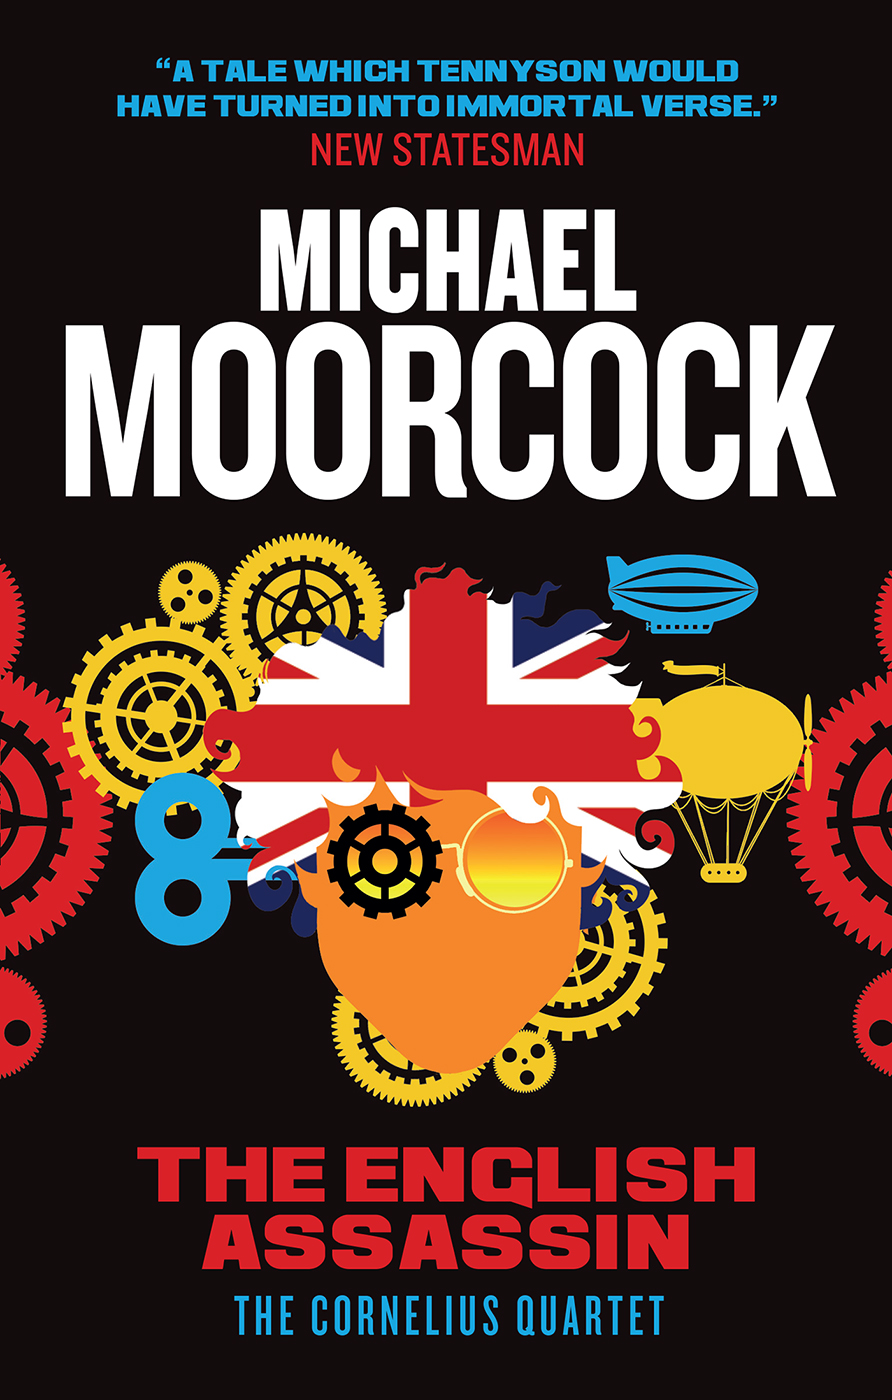 The English Assassin by Michael Moorcock